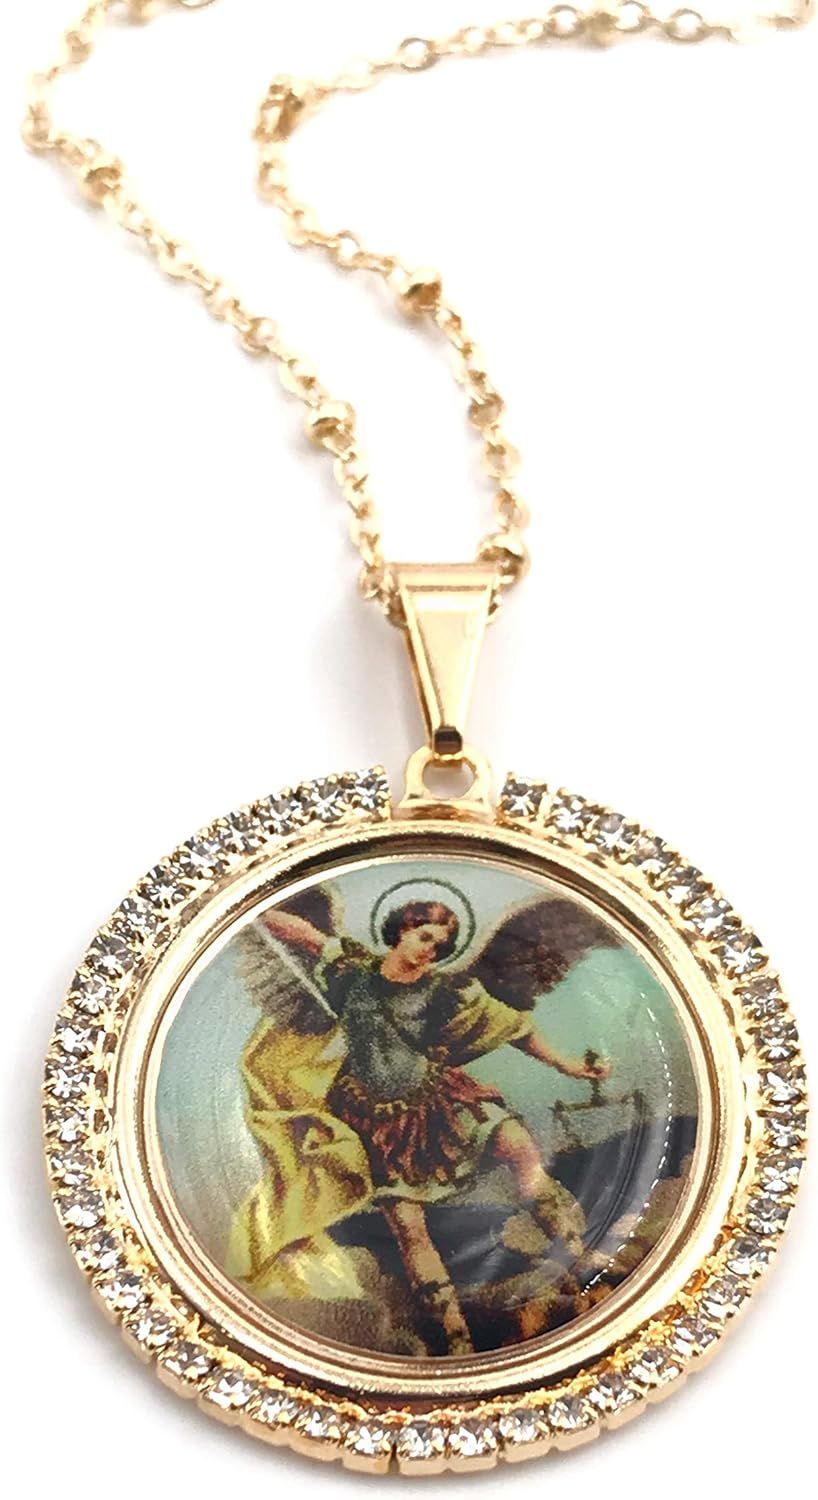 LESLIE BOULES St Michael The Archangel Pendant Necklace 18K Gold Plated Chain 18 Inches Length | Amazon (US)